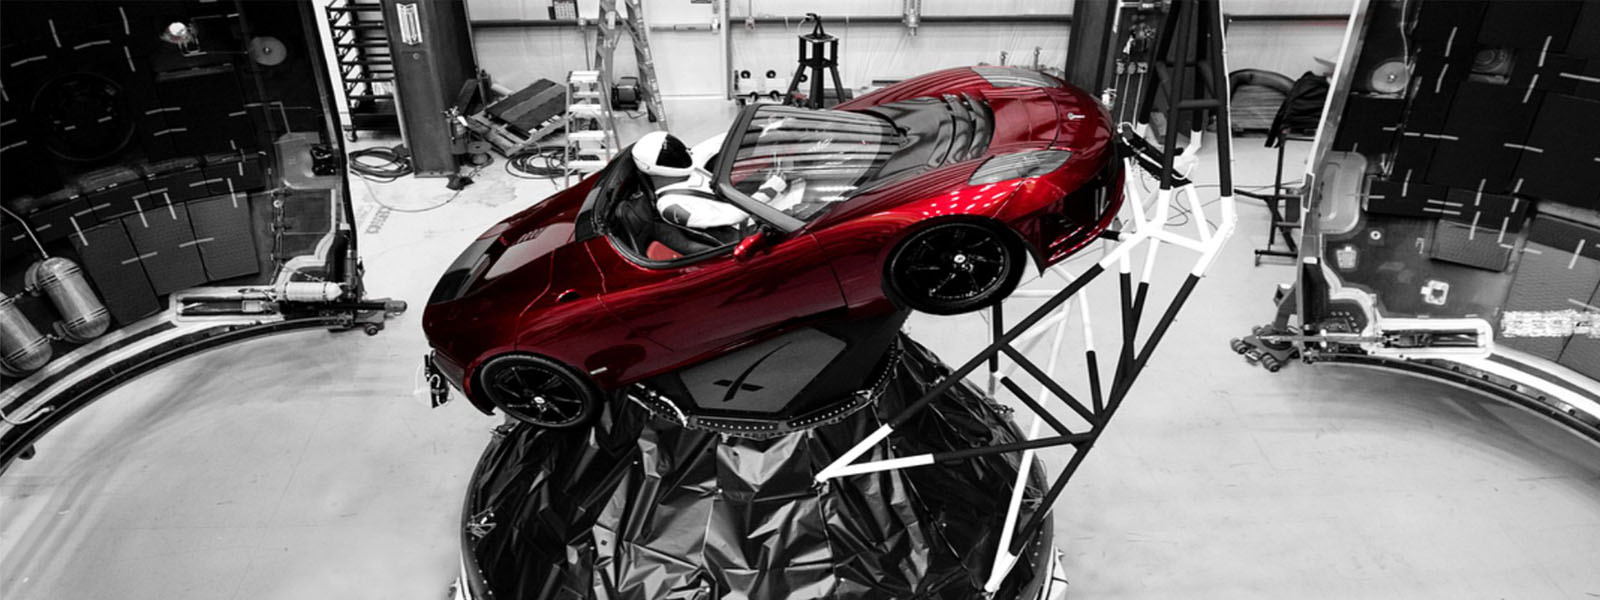 Elon Musk sent his car into space (Photo & Video)